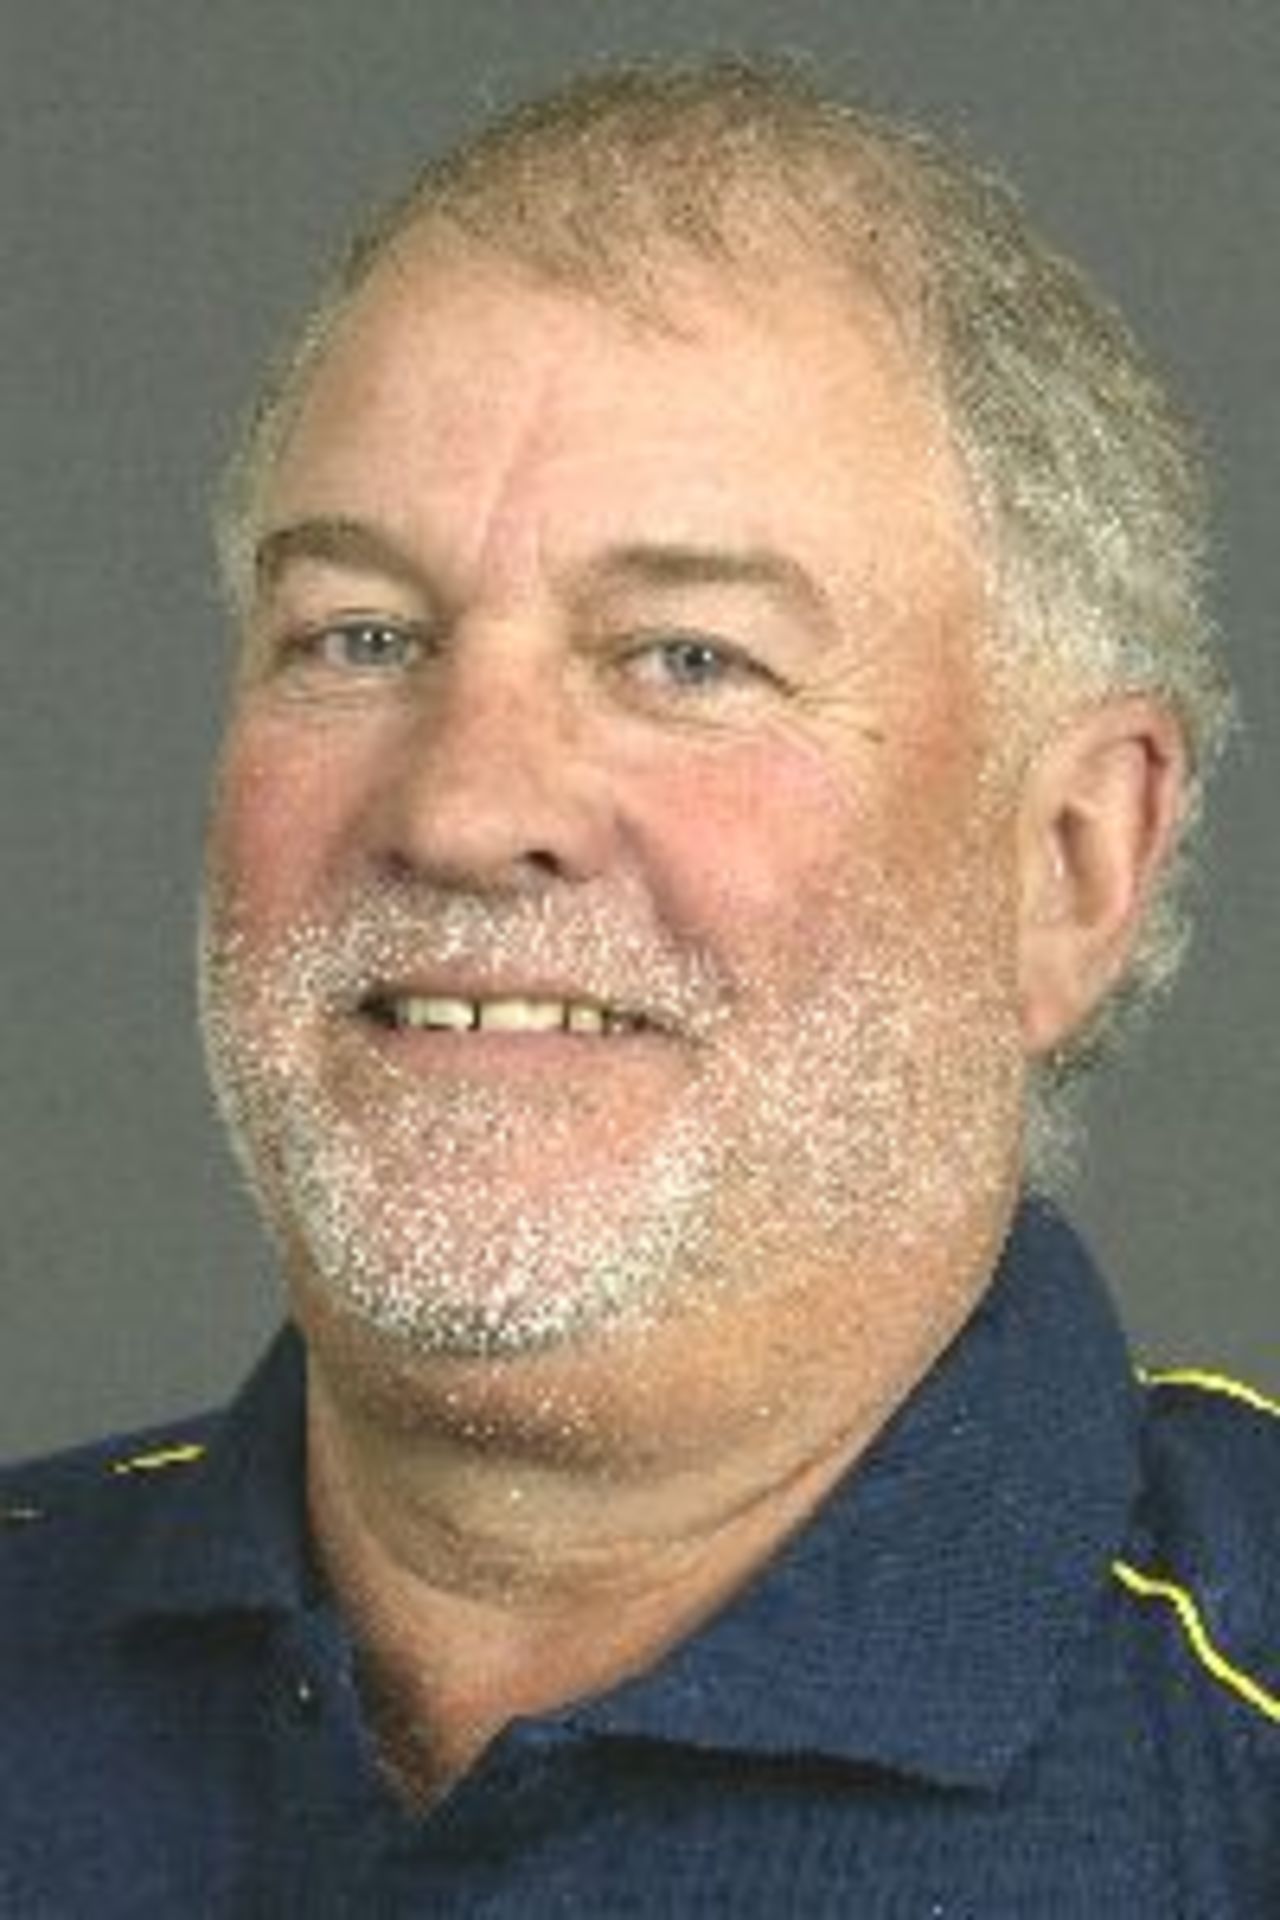 Portrait of Dave Orchard, umpire, August 2002